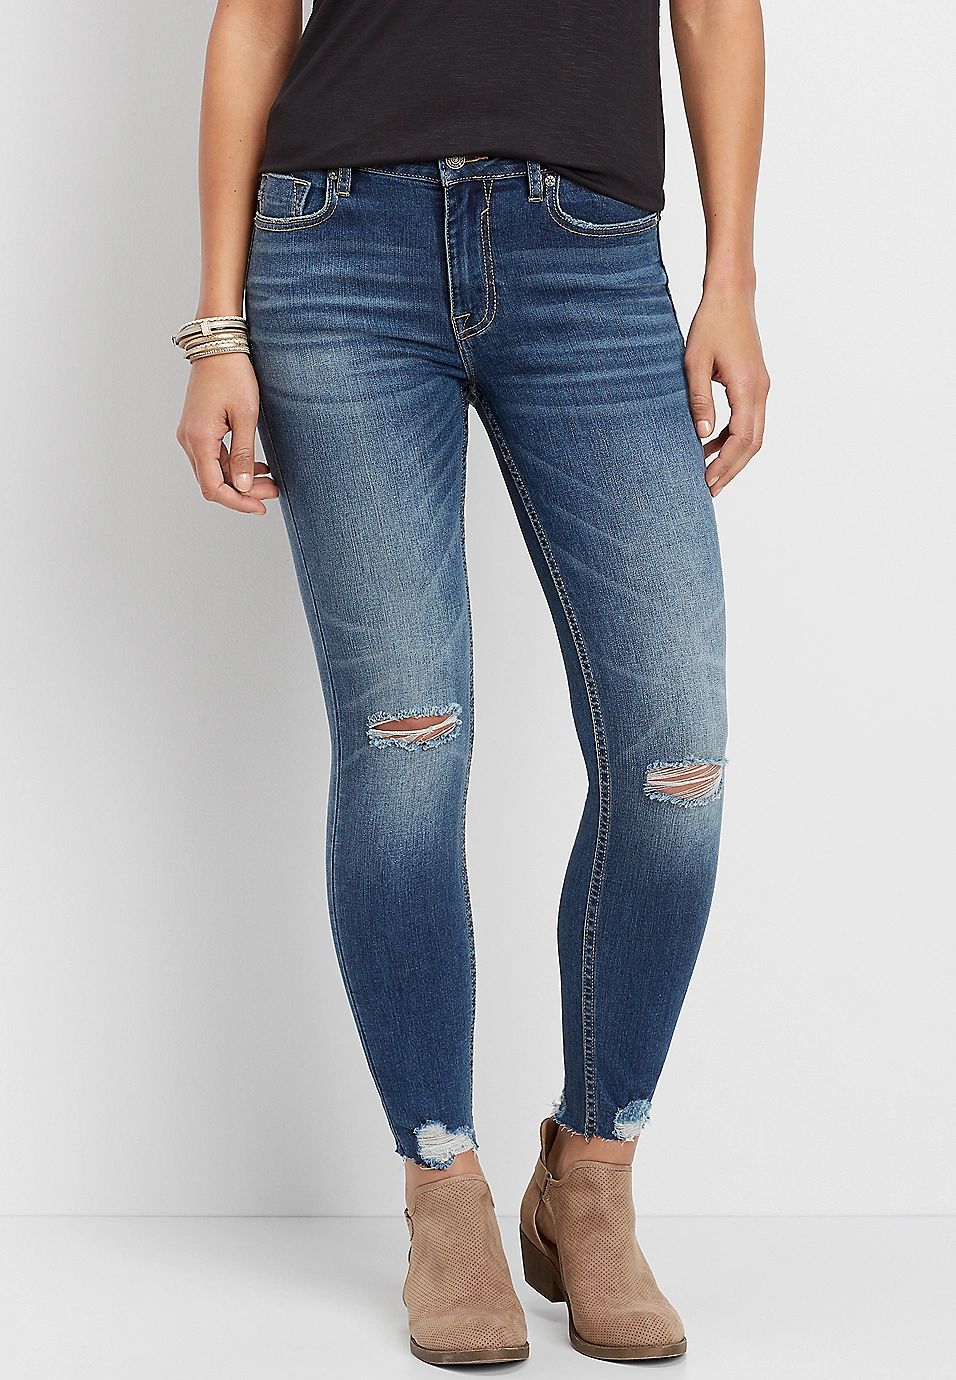 Vigoss® classic Marley destructed skinny jean | Maurices